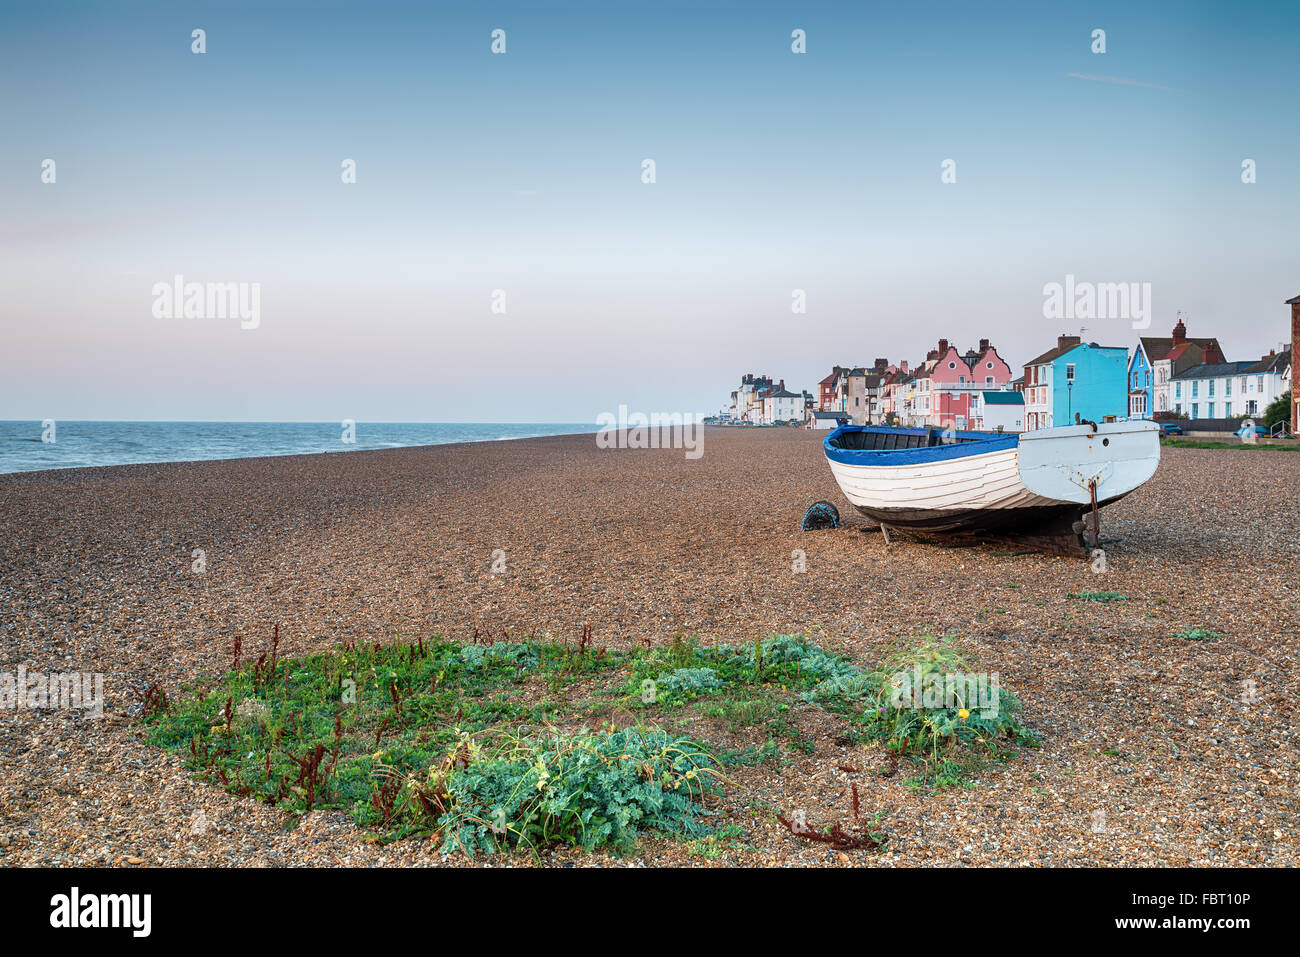 The shingle beach and pretty seaside town of Aldeburgh on the Suffolk coast Stock Photo